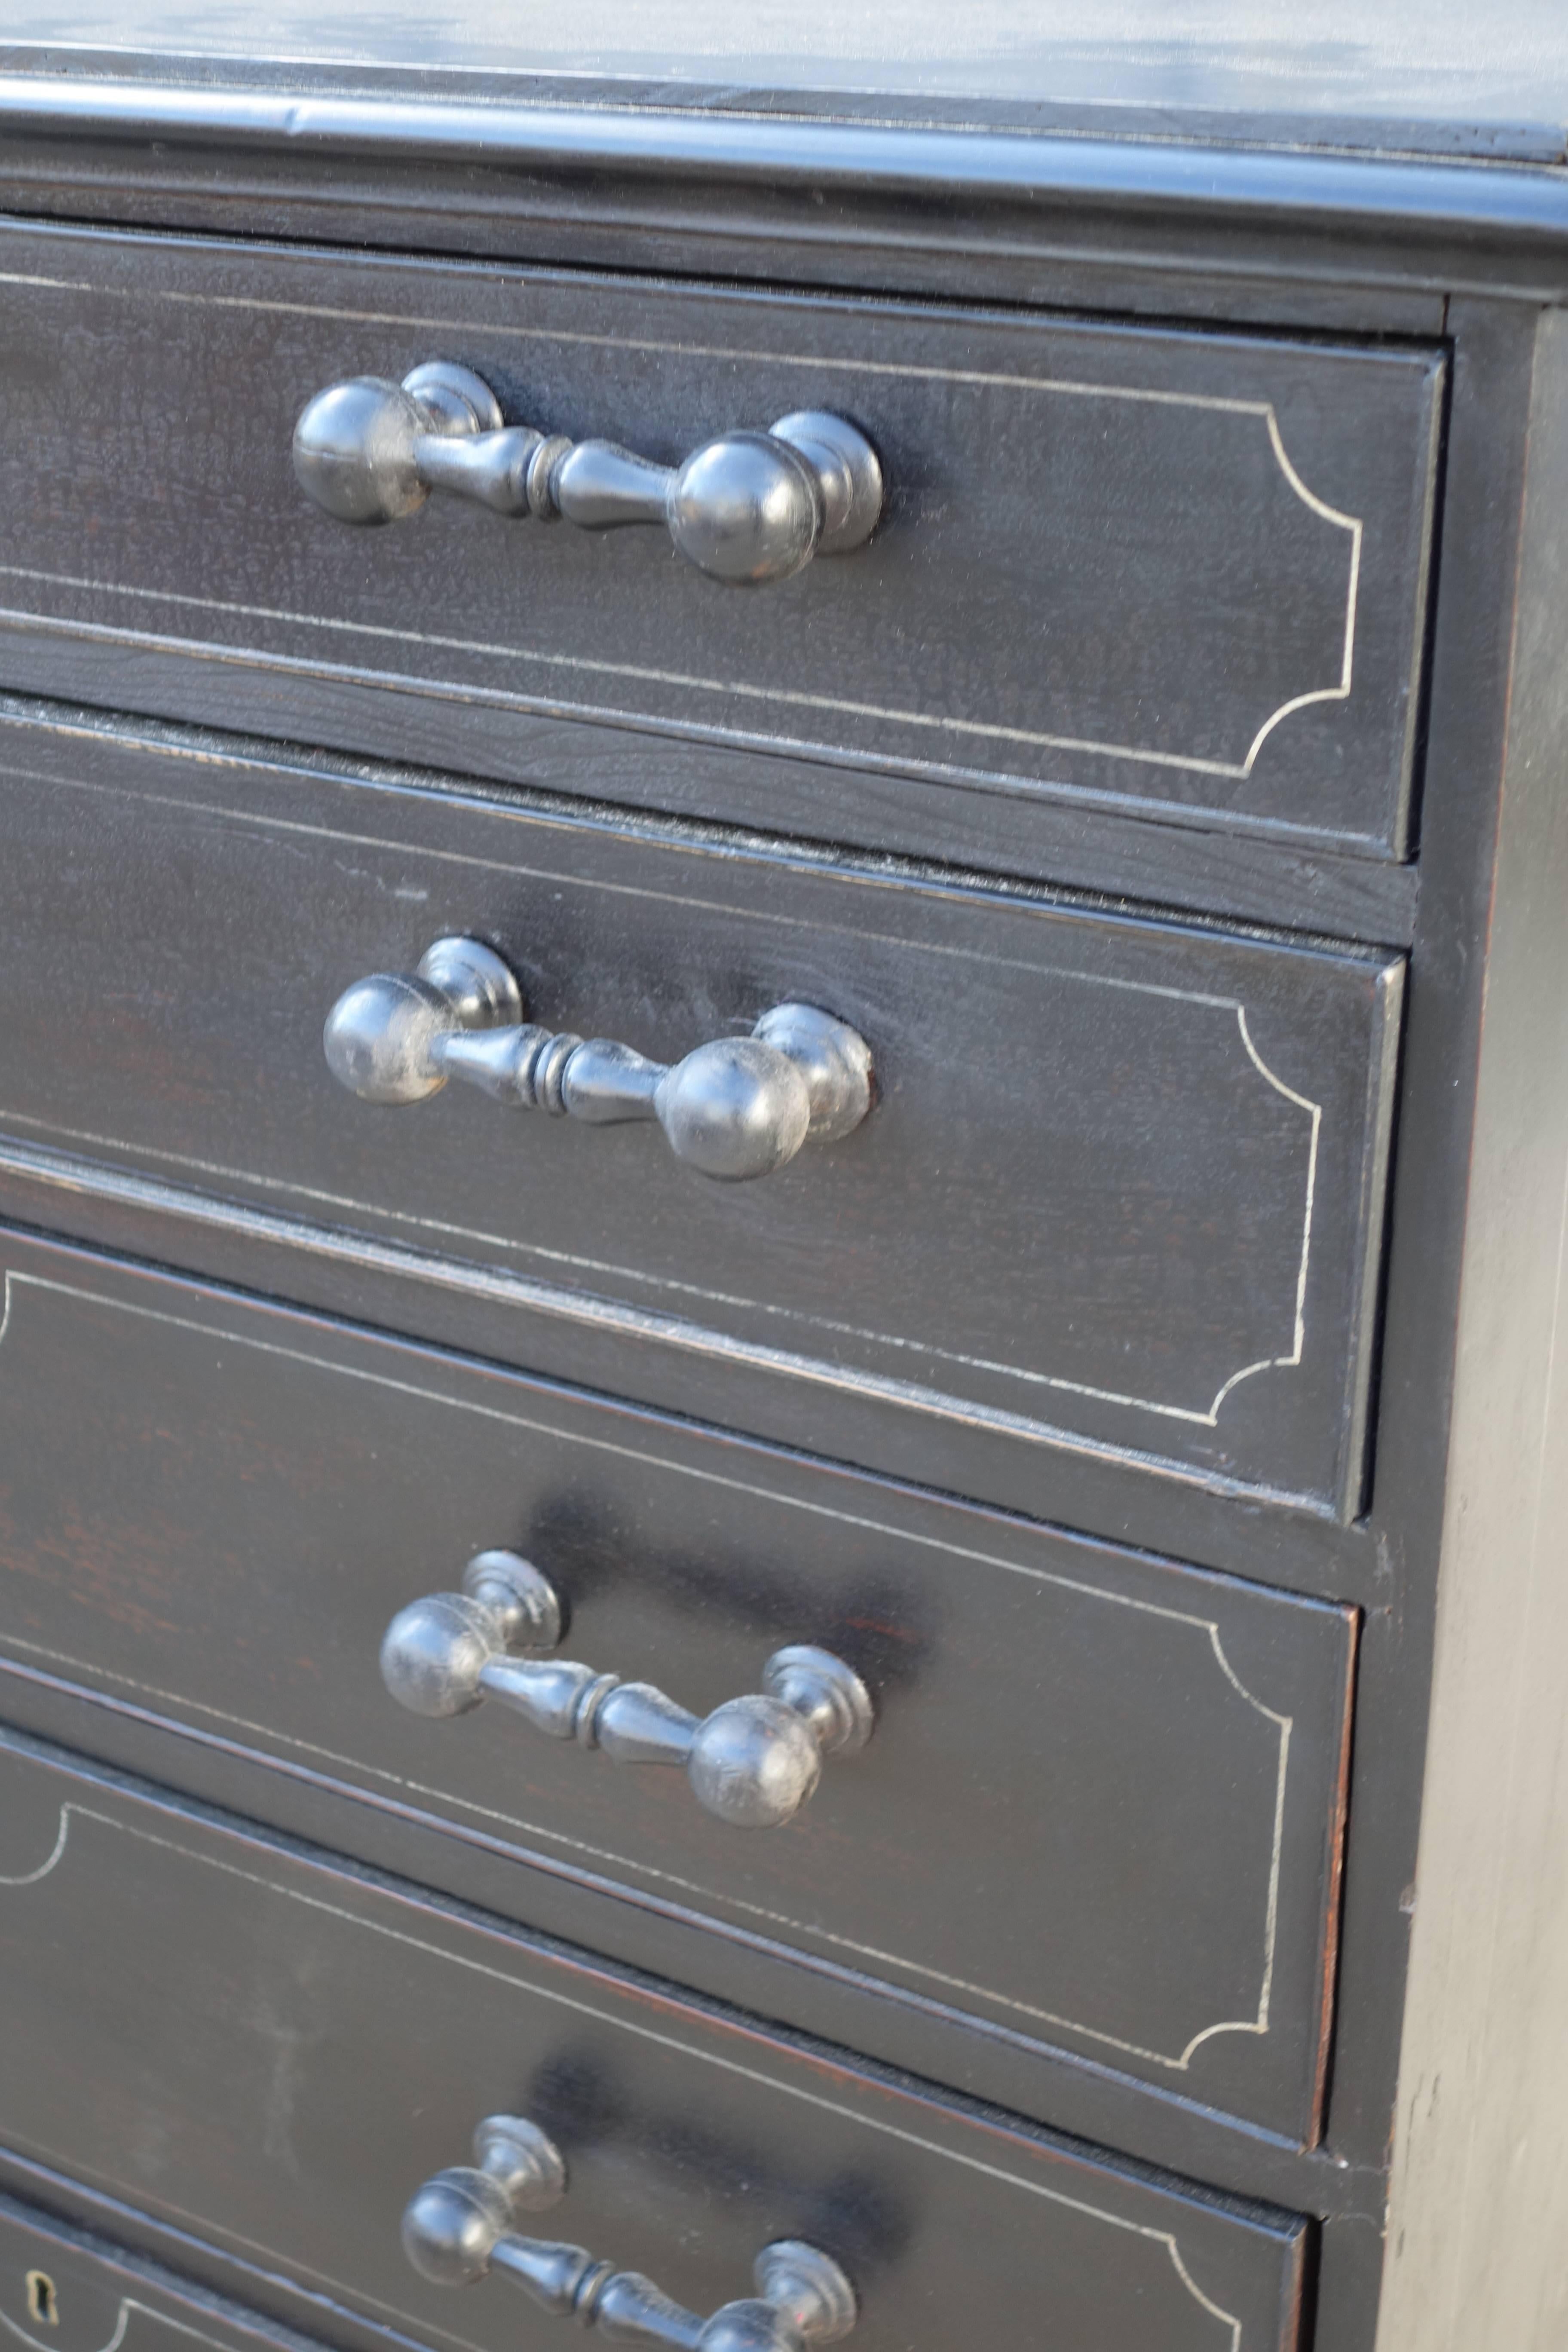 English dresser in ebony paint finish, with faux moulding detail, and unusual handles.